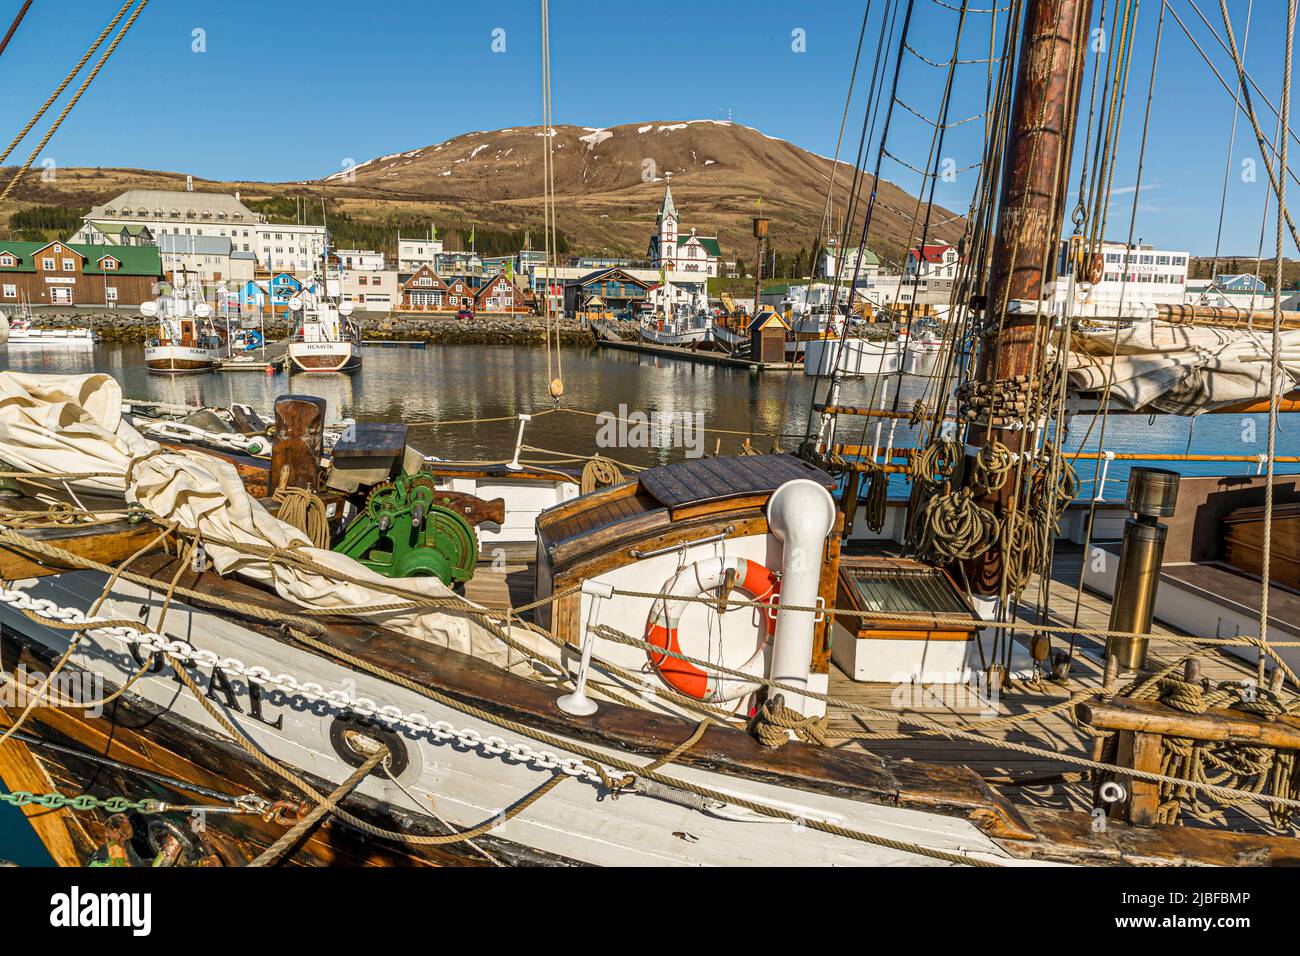 In the harbor of Húsavík are moored numerous historic wooden sailboats Stock Photo